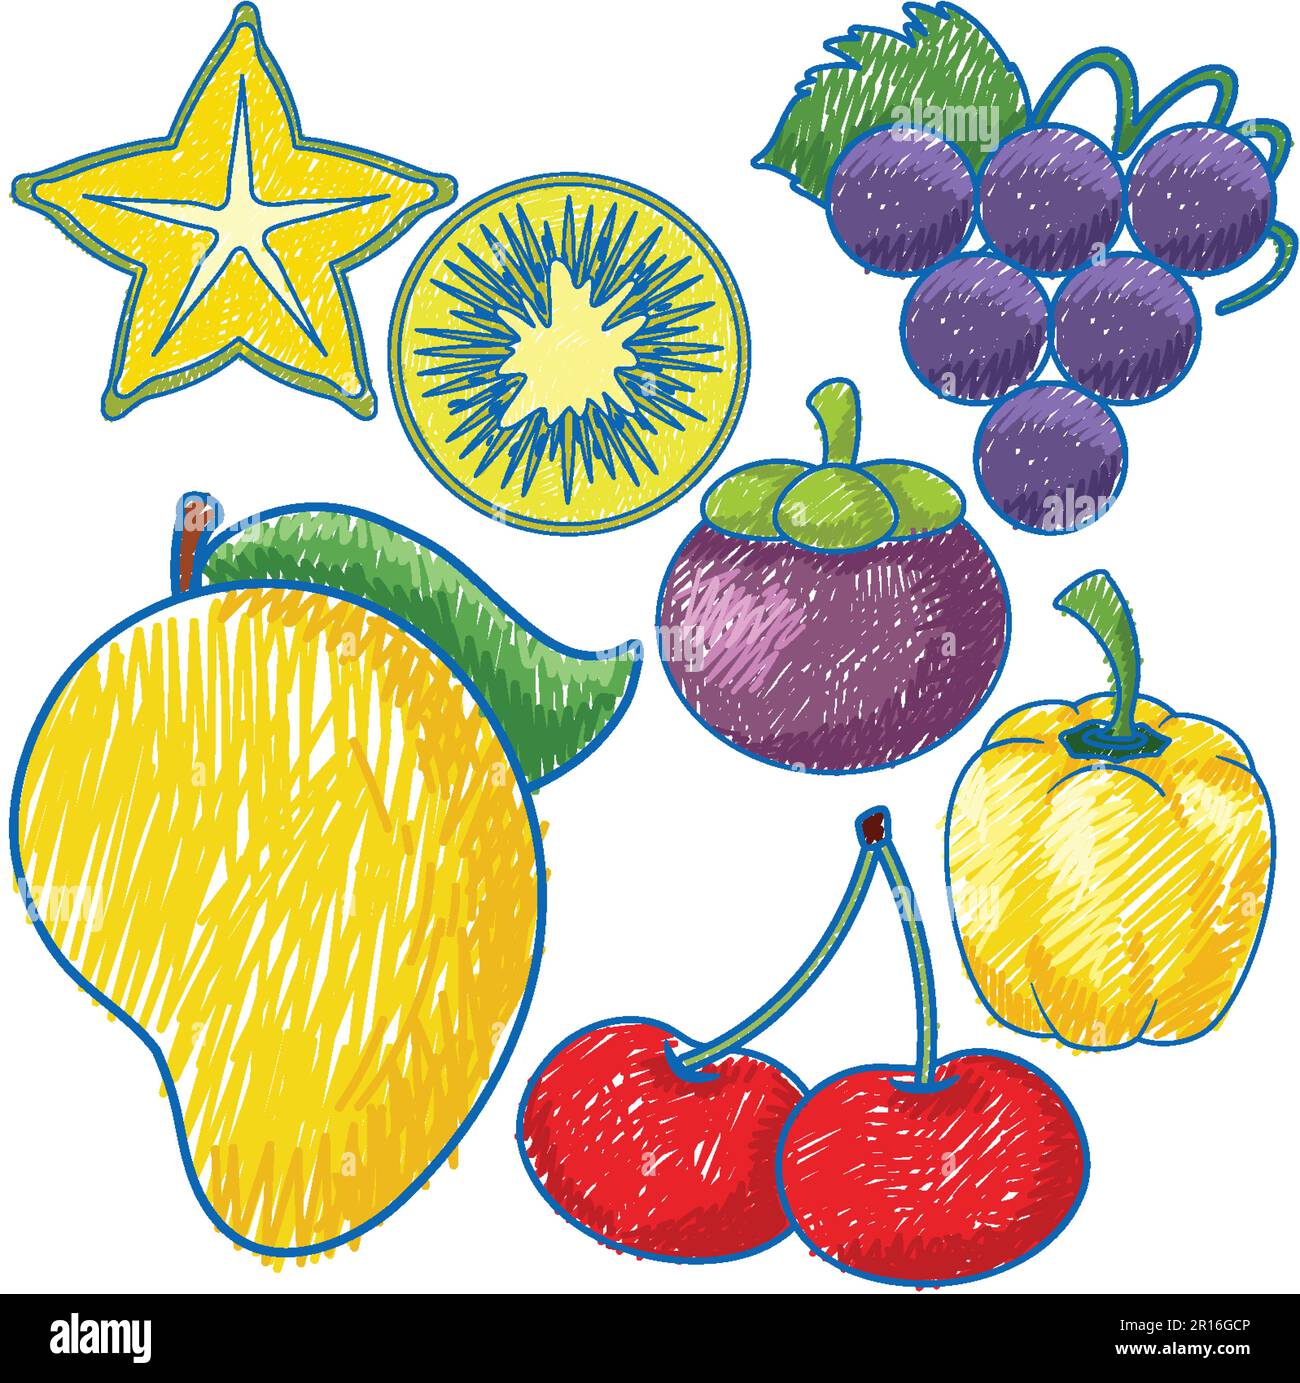 How To Draw Fruits and Vegetables and colouring Dresses for Kids, Learn to  color a fruit Basket - YouTube | Fruits drawing, Fruits for kids, Easy  drawings for kids